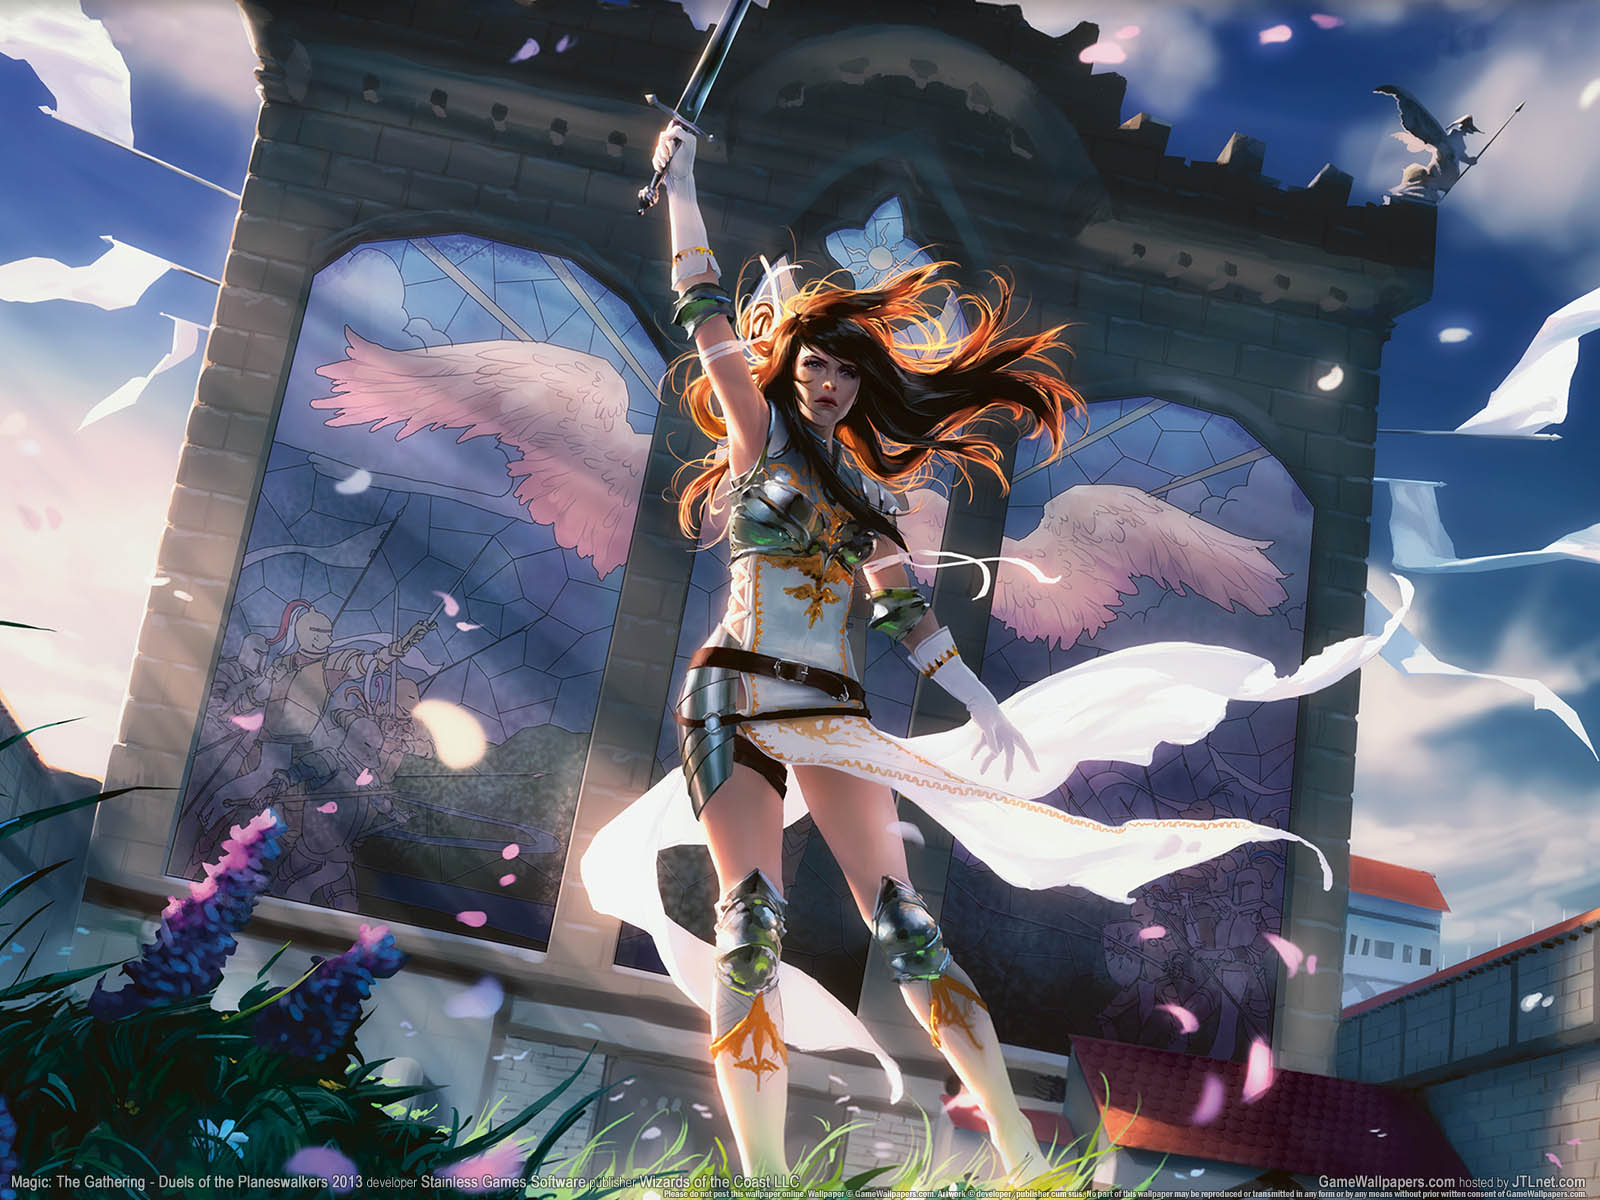 Magic%3A The Gathering - Duels of the Planeswalkers 2013 wallpaper 01 1600x1200